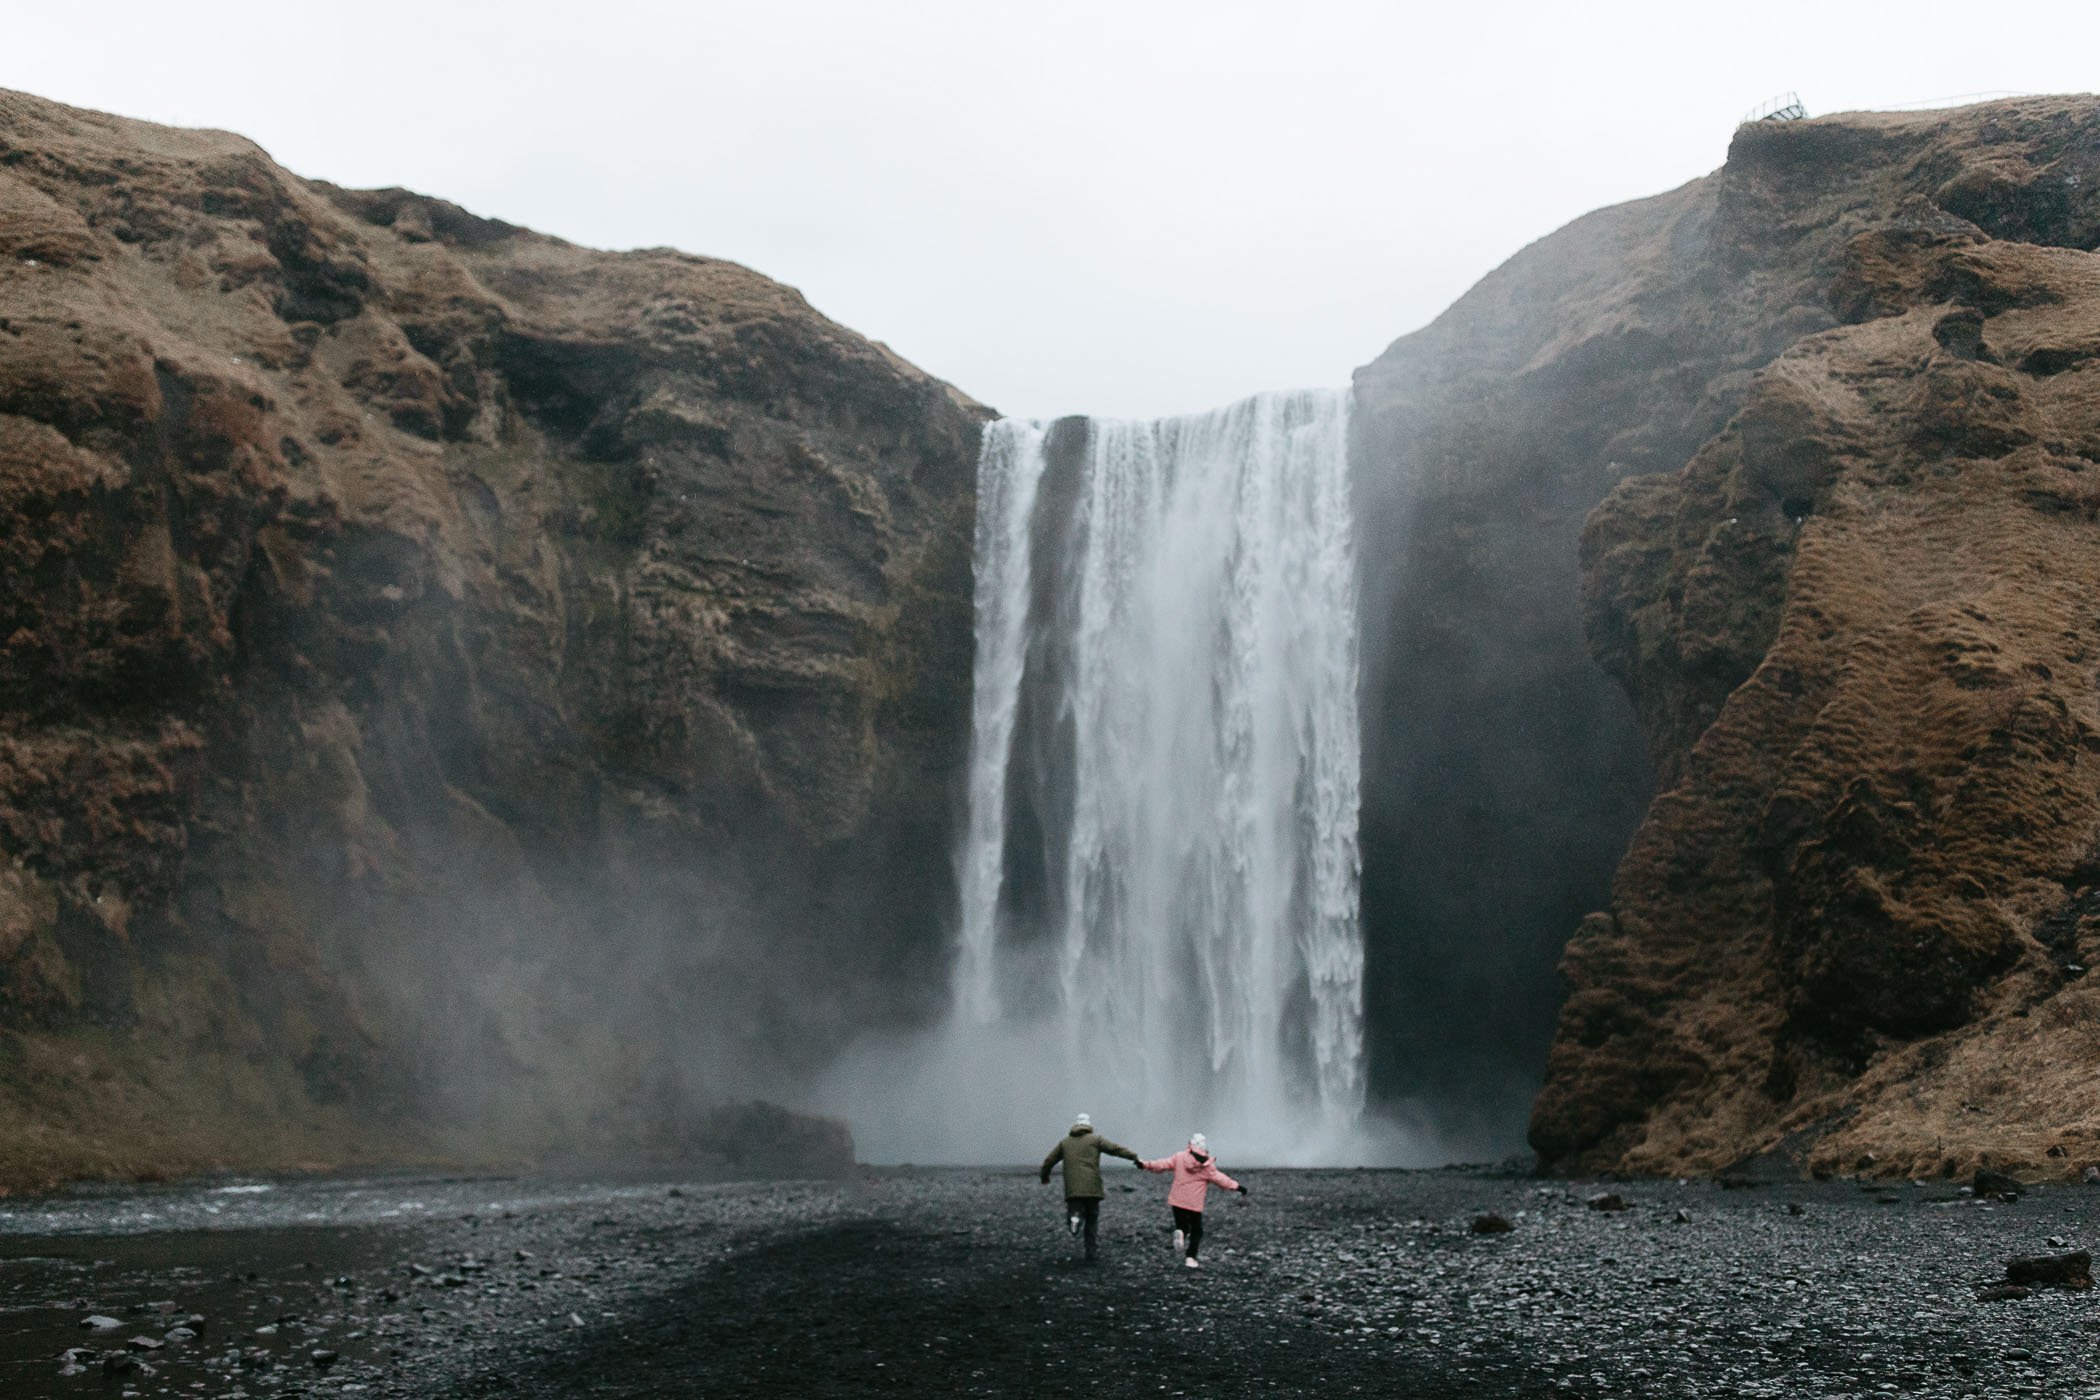 Eloping-in-Iceland-Full-Guide-to-Getting-Married-in-Iceland-Elopement-Photographer--135.jpg